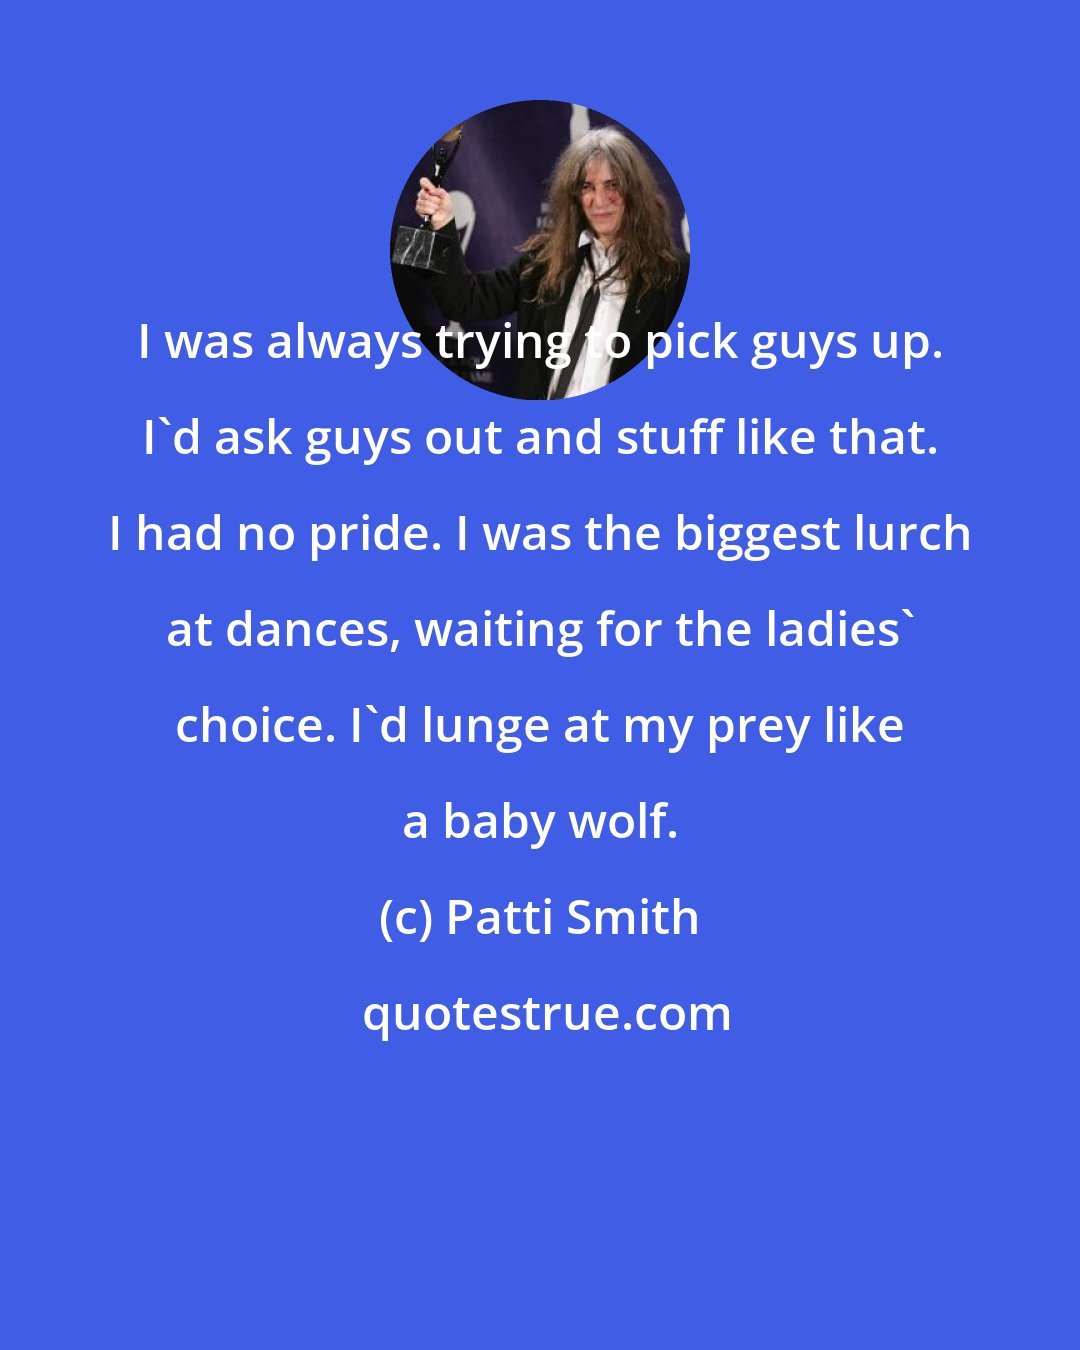 Patti Smith: I was always trying to pick guys up. I'd ask guys out and stuff like that. I had no pride. I was the biggest lurch at dances, waiting for the ladies' choice. I'd lunge at my prey like a baby wolf.